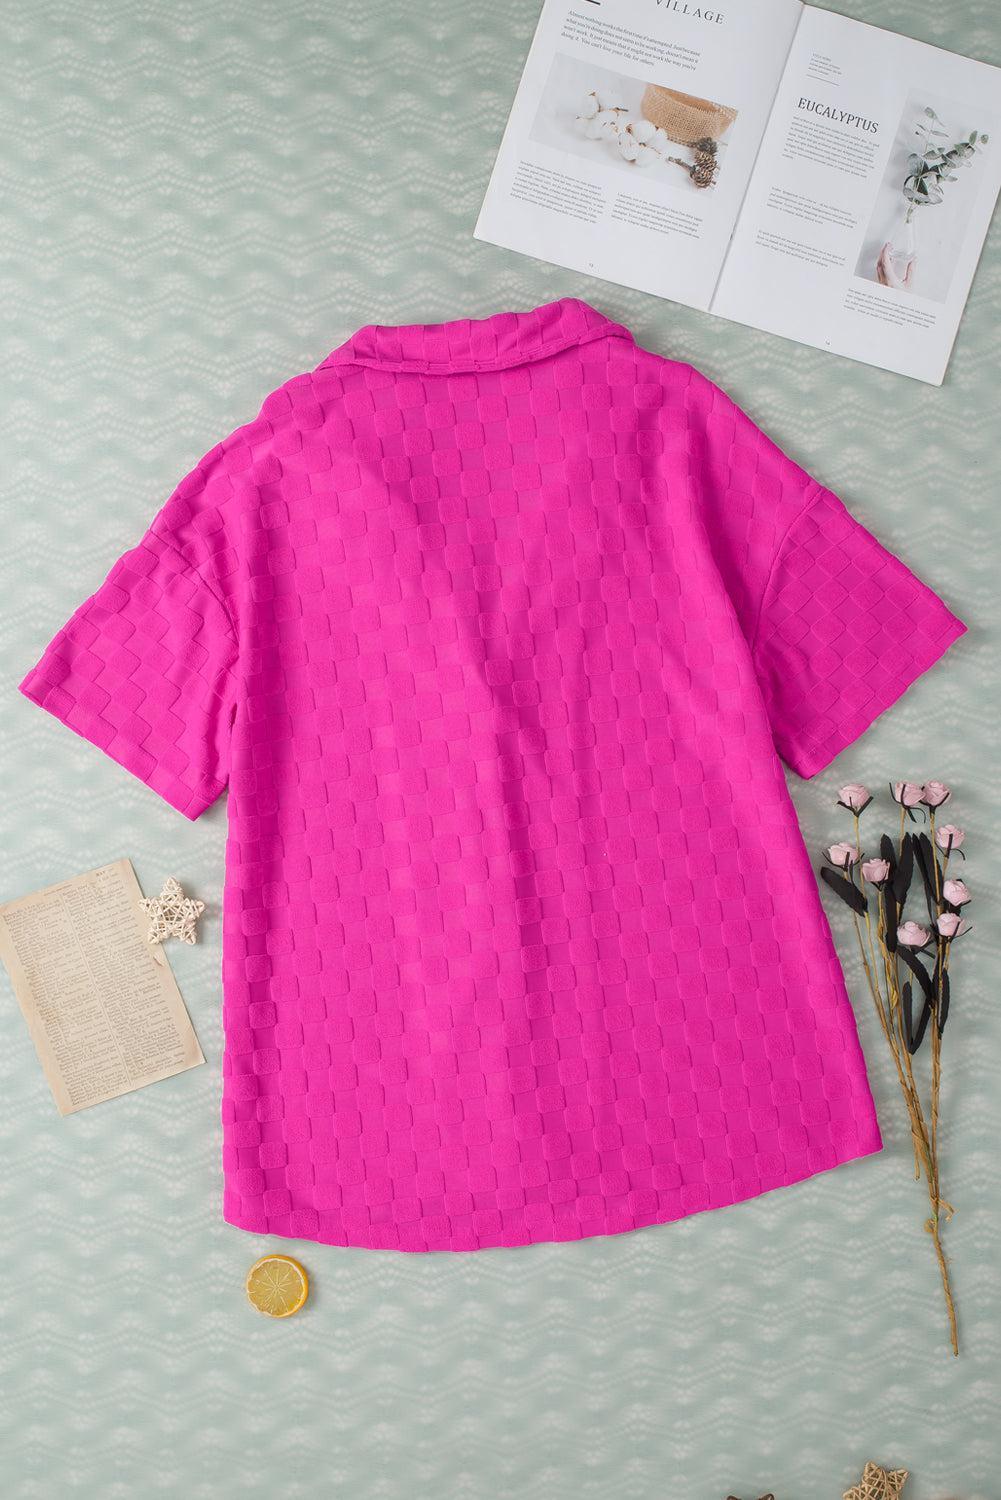 a pink shirt sitting on top of a table